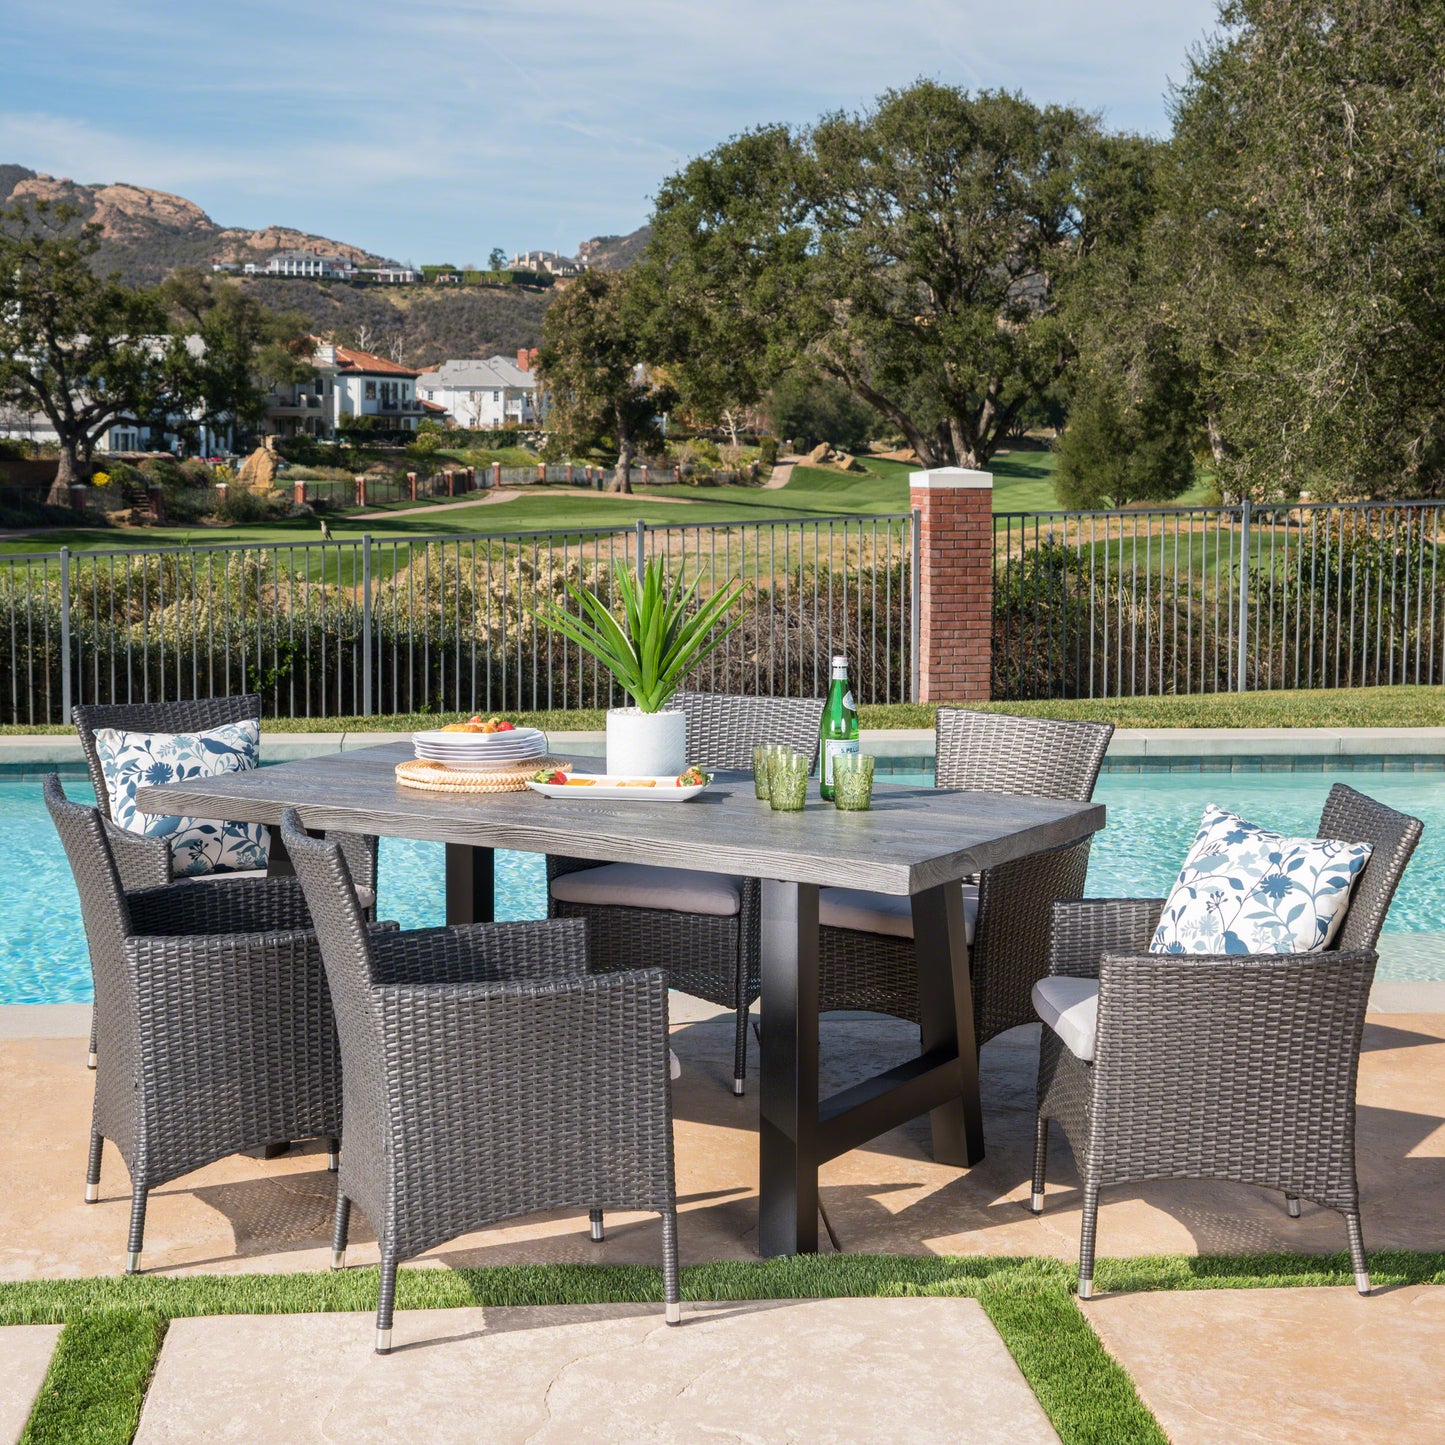 Gina Outdoor 7 Piece Wicker Dining Set with Light Weight Concrete Table